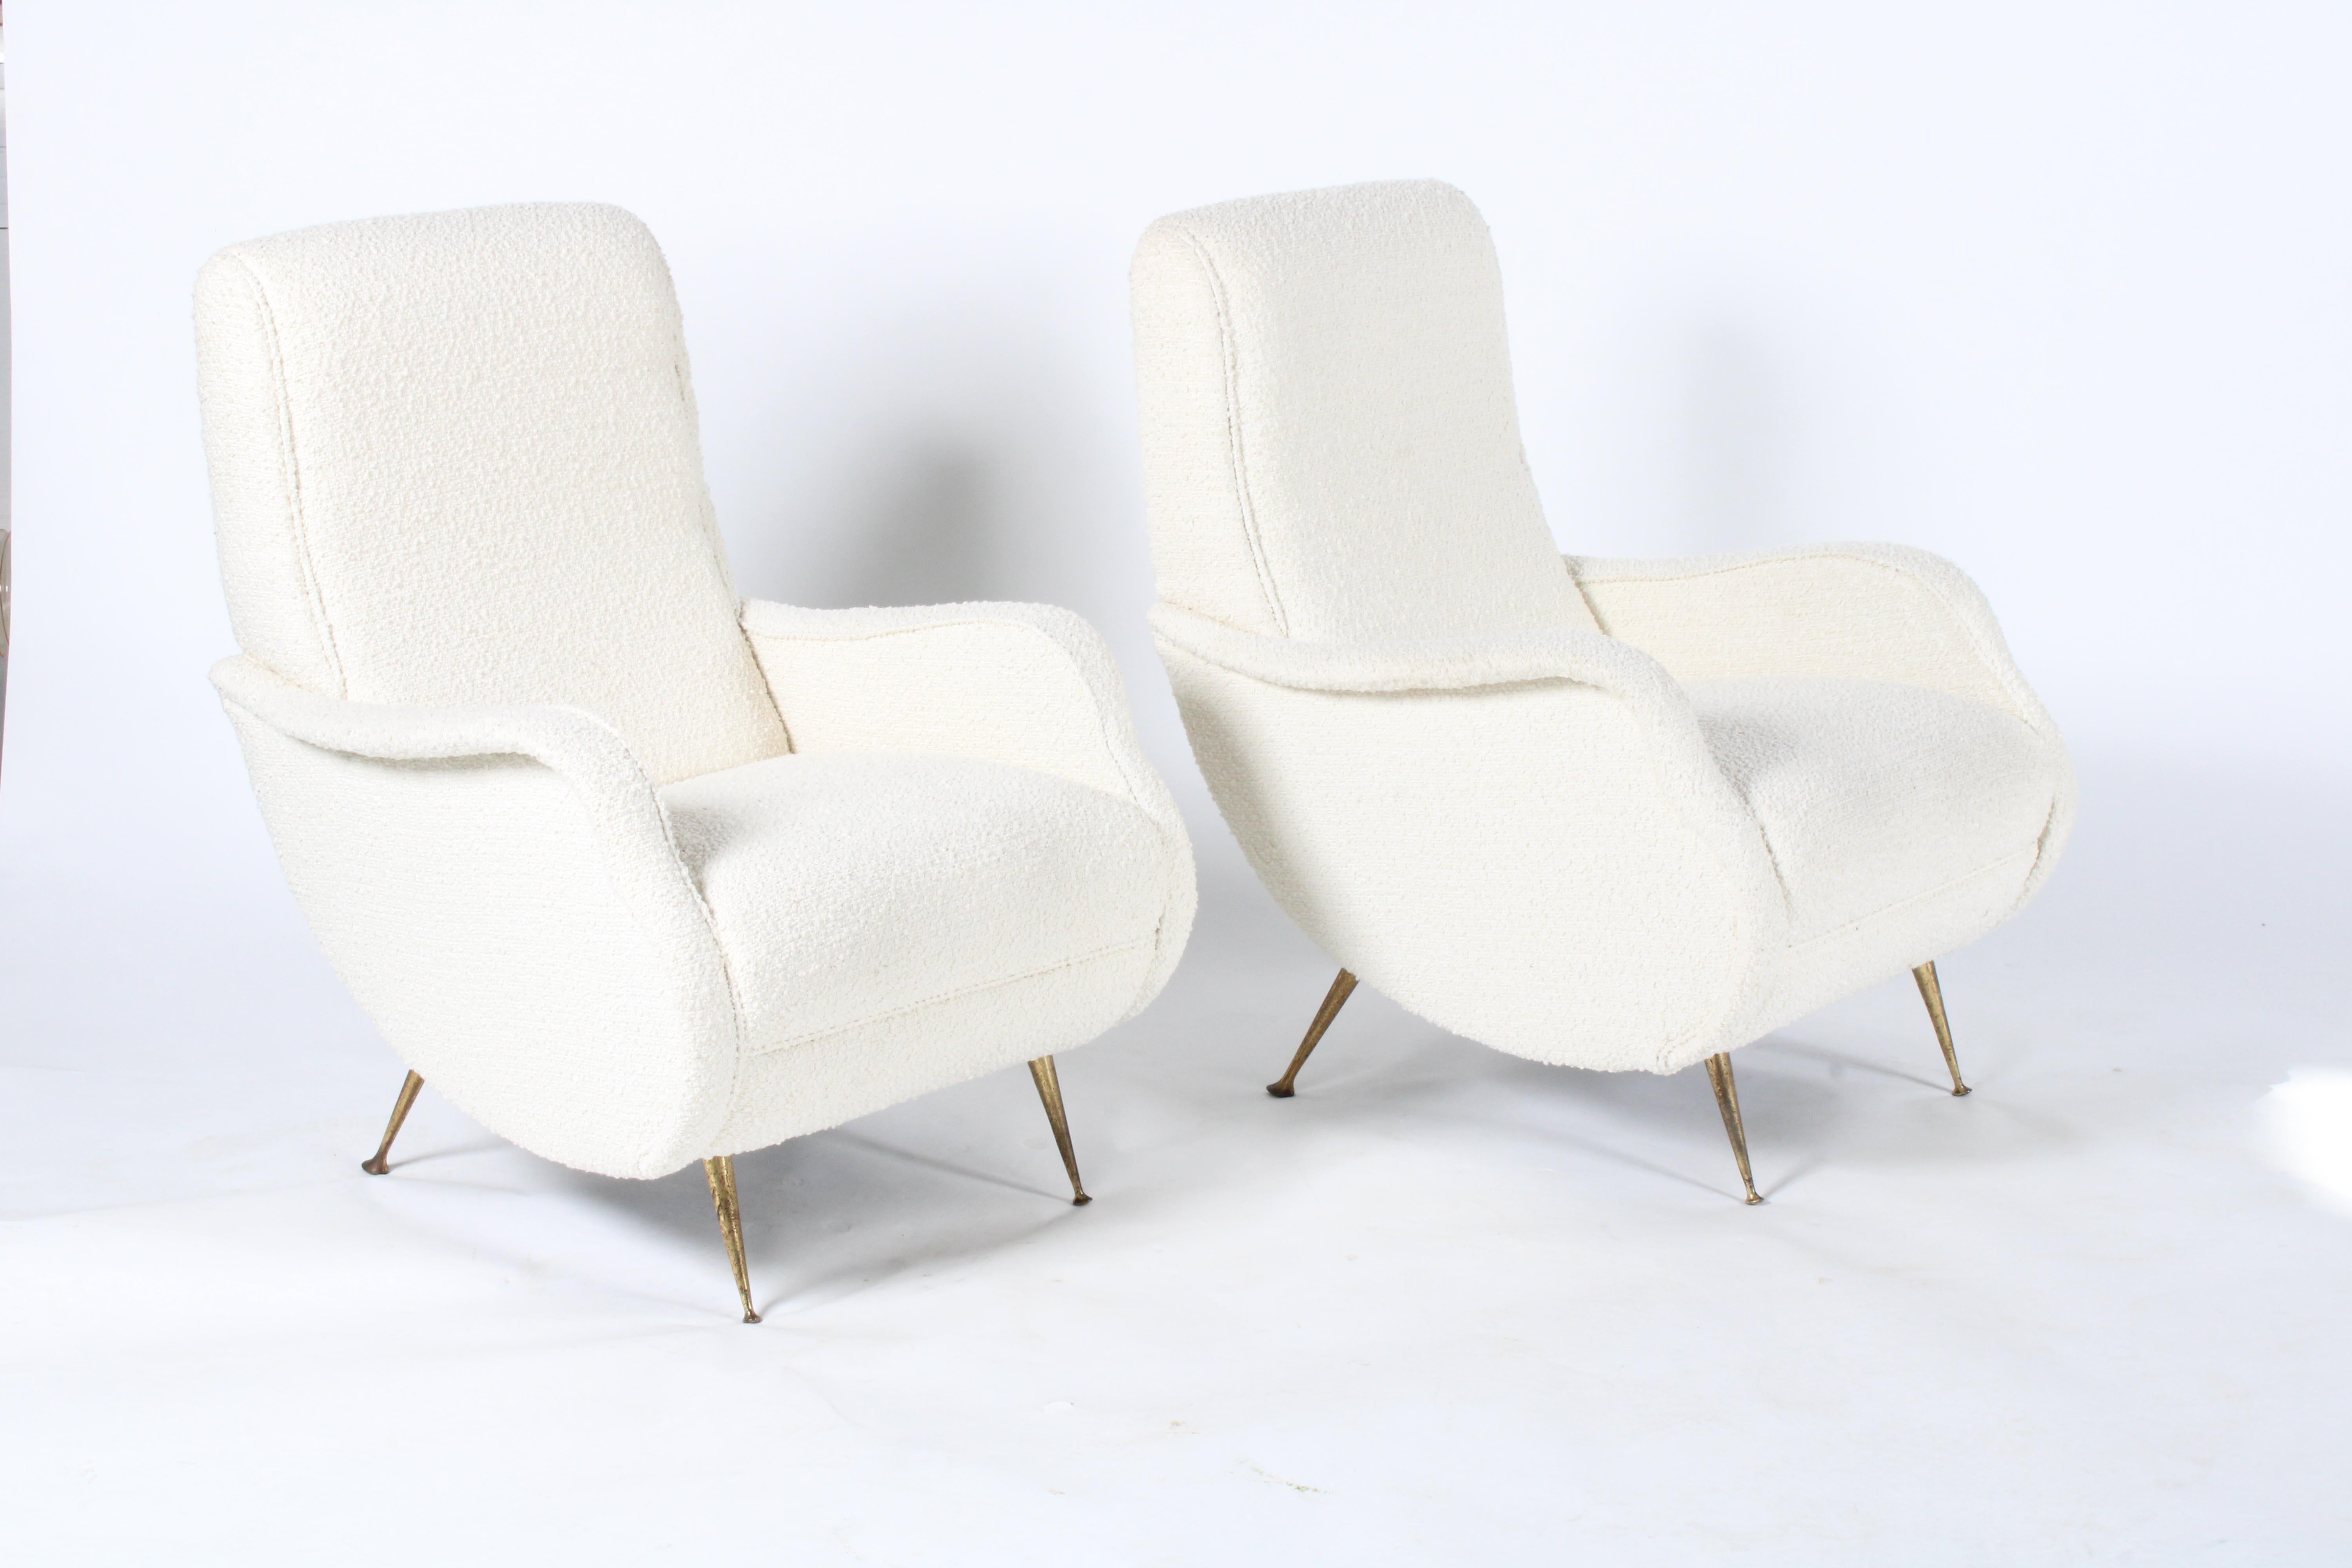 Sublime pair of original Mid-Century Modern Italian armchairs. Sourced in Modena Italy from a private collection this amazing pair have been newly upholstered in a chic bouclé type fabric. Sweeping super stylish curved armrests and sides almost give